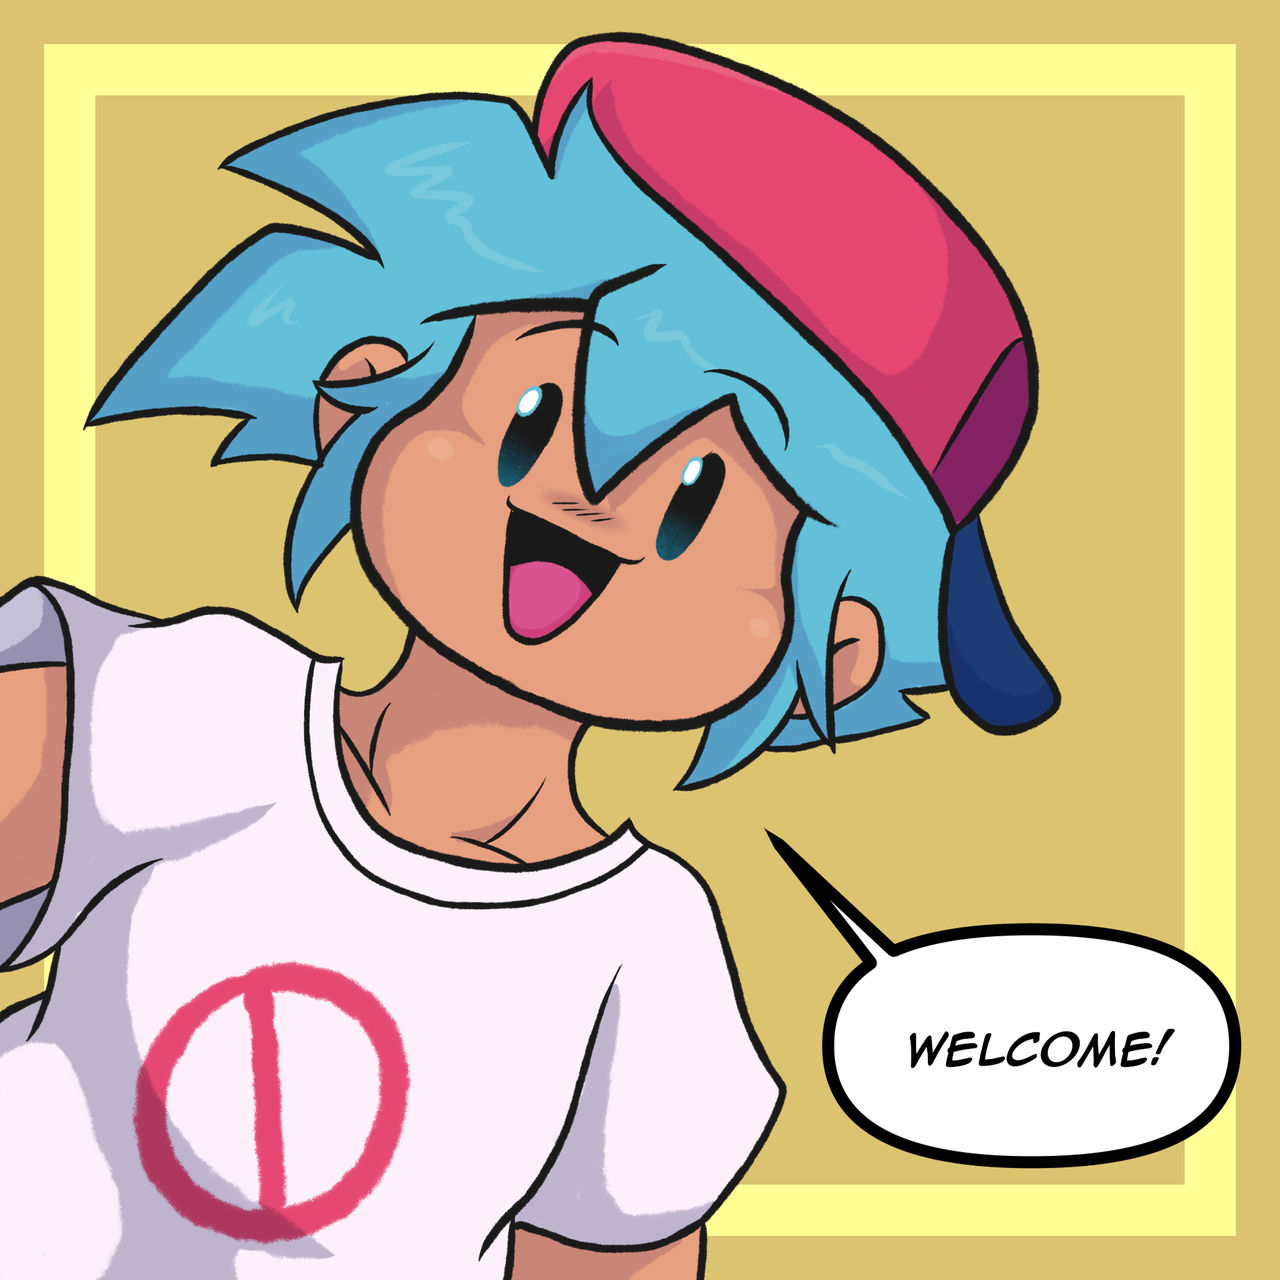 hi welcome to chili's, by fnacworld on DeviantArt